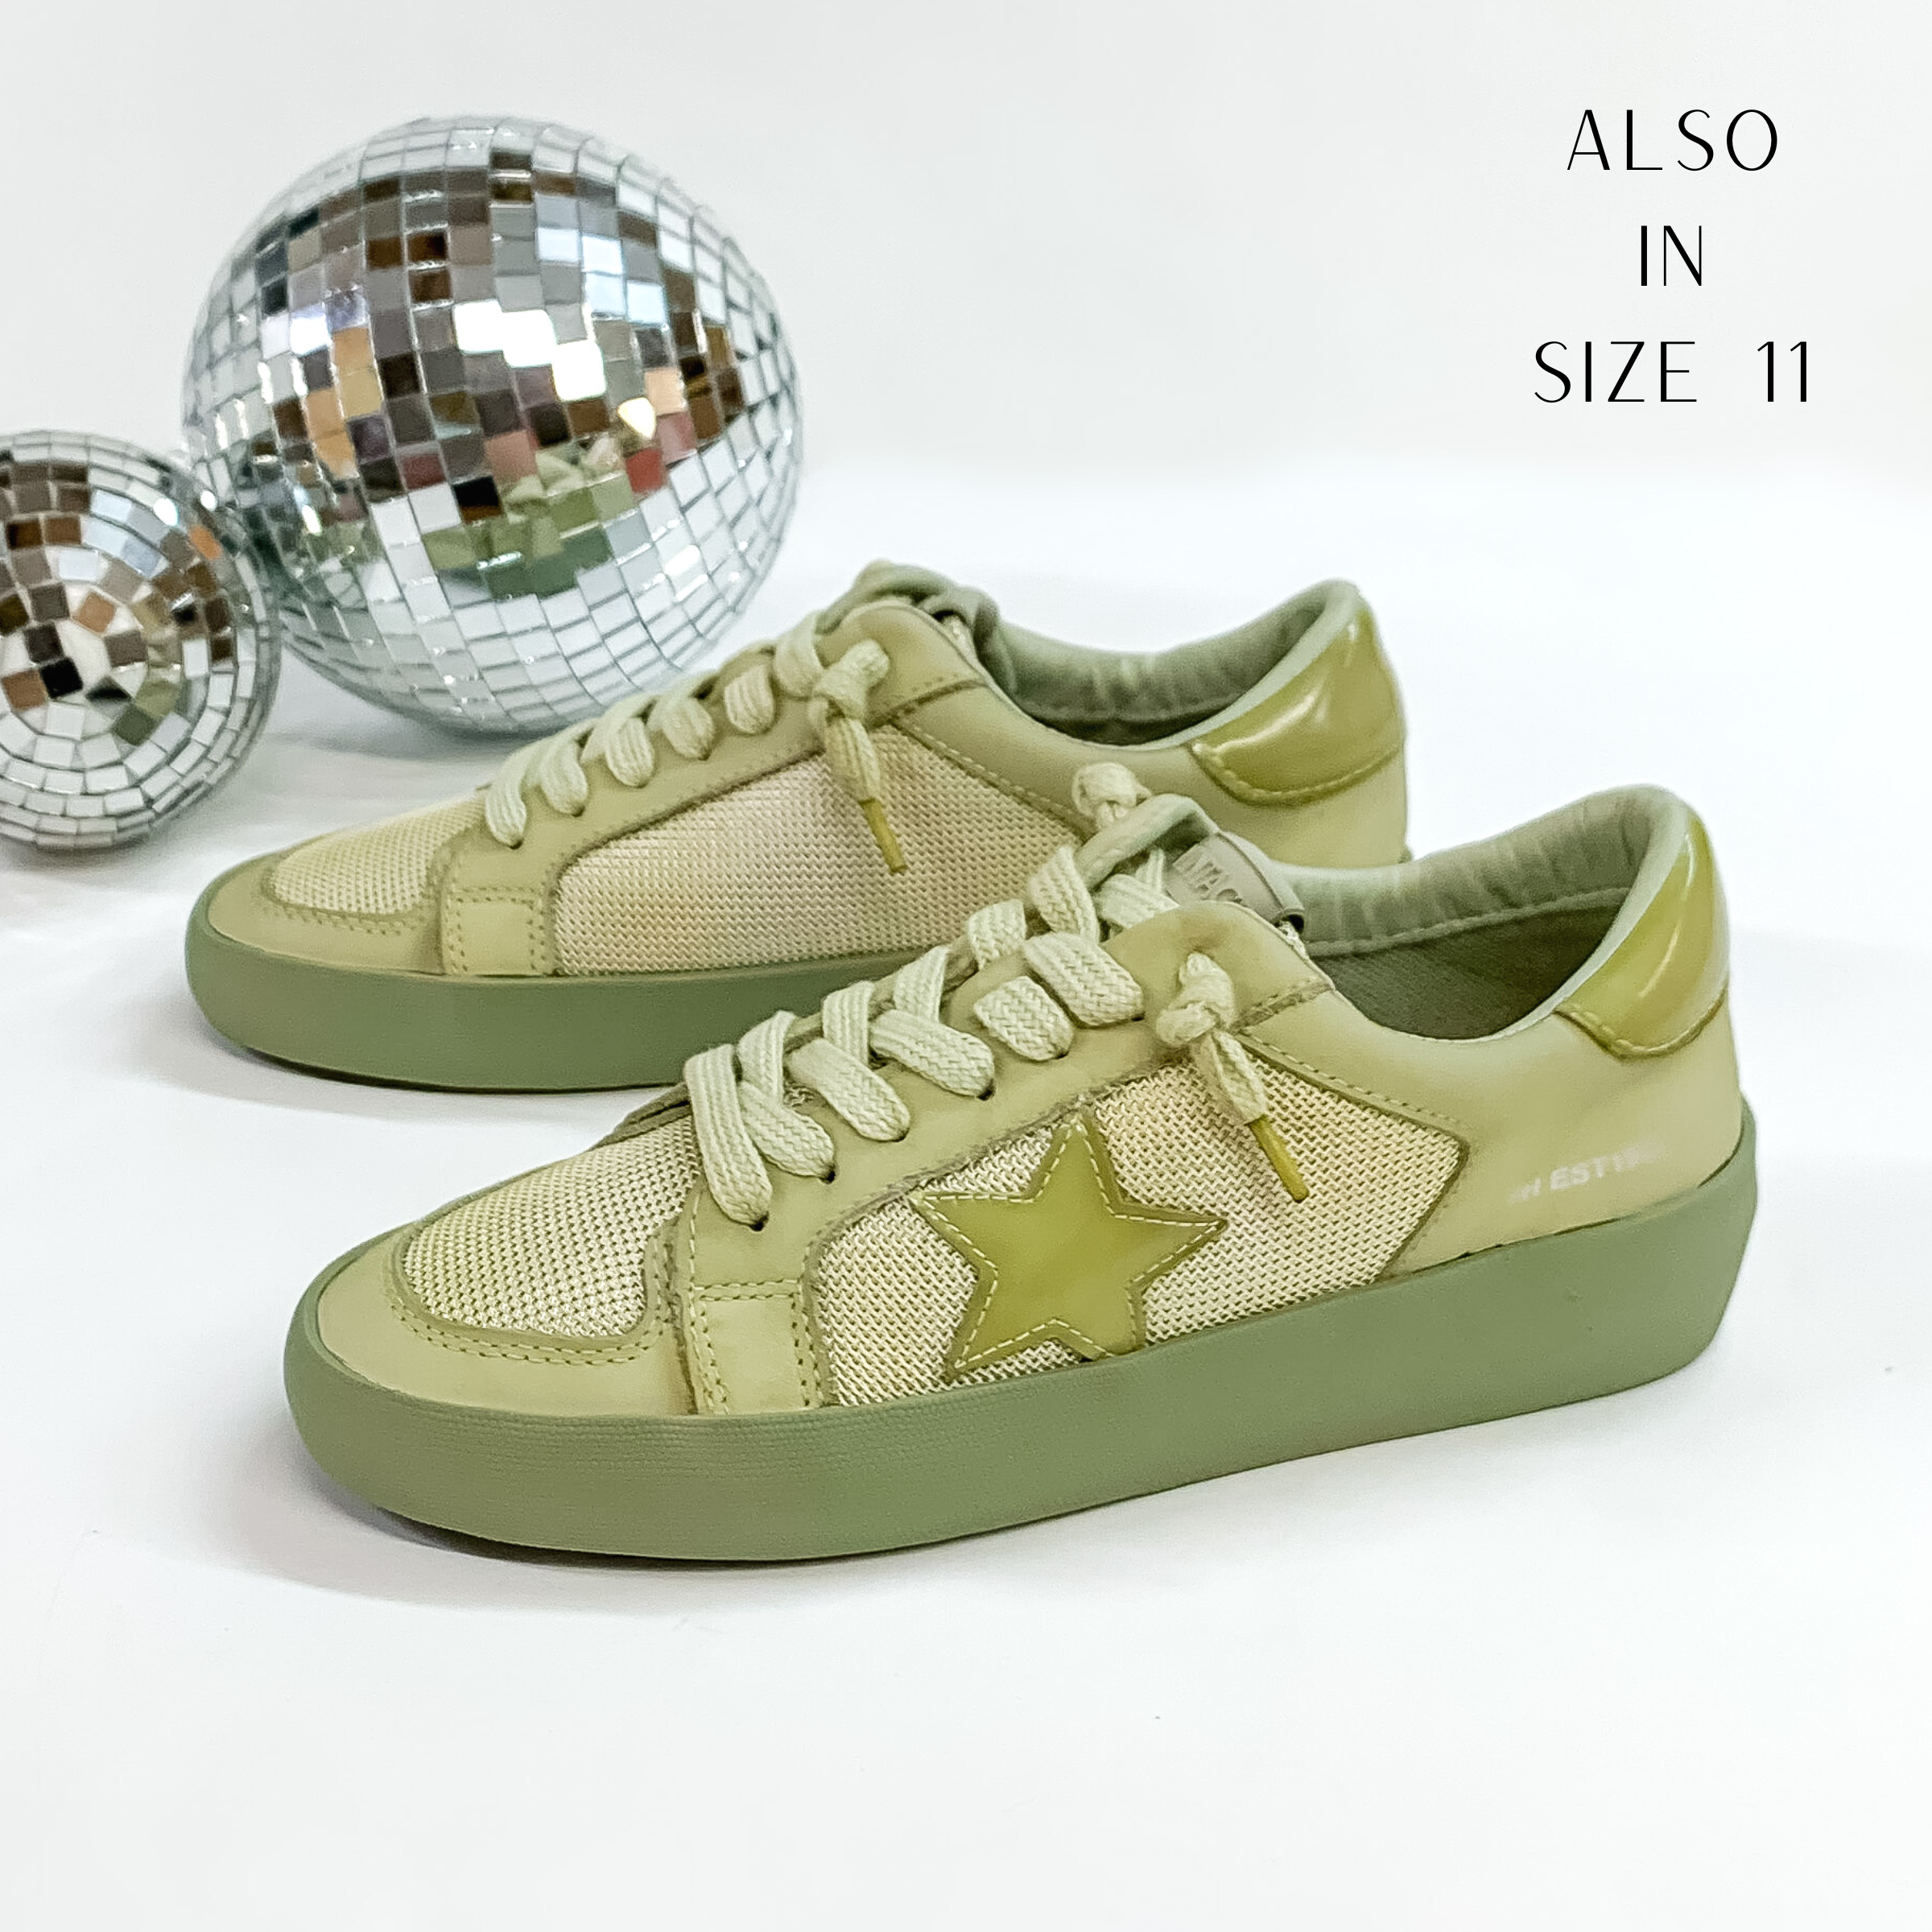 These tennis shoes are an olive green color with green laces and a green star emblem. These tennis shoes are pictured in front of disco balls on a white background.